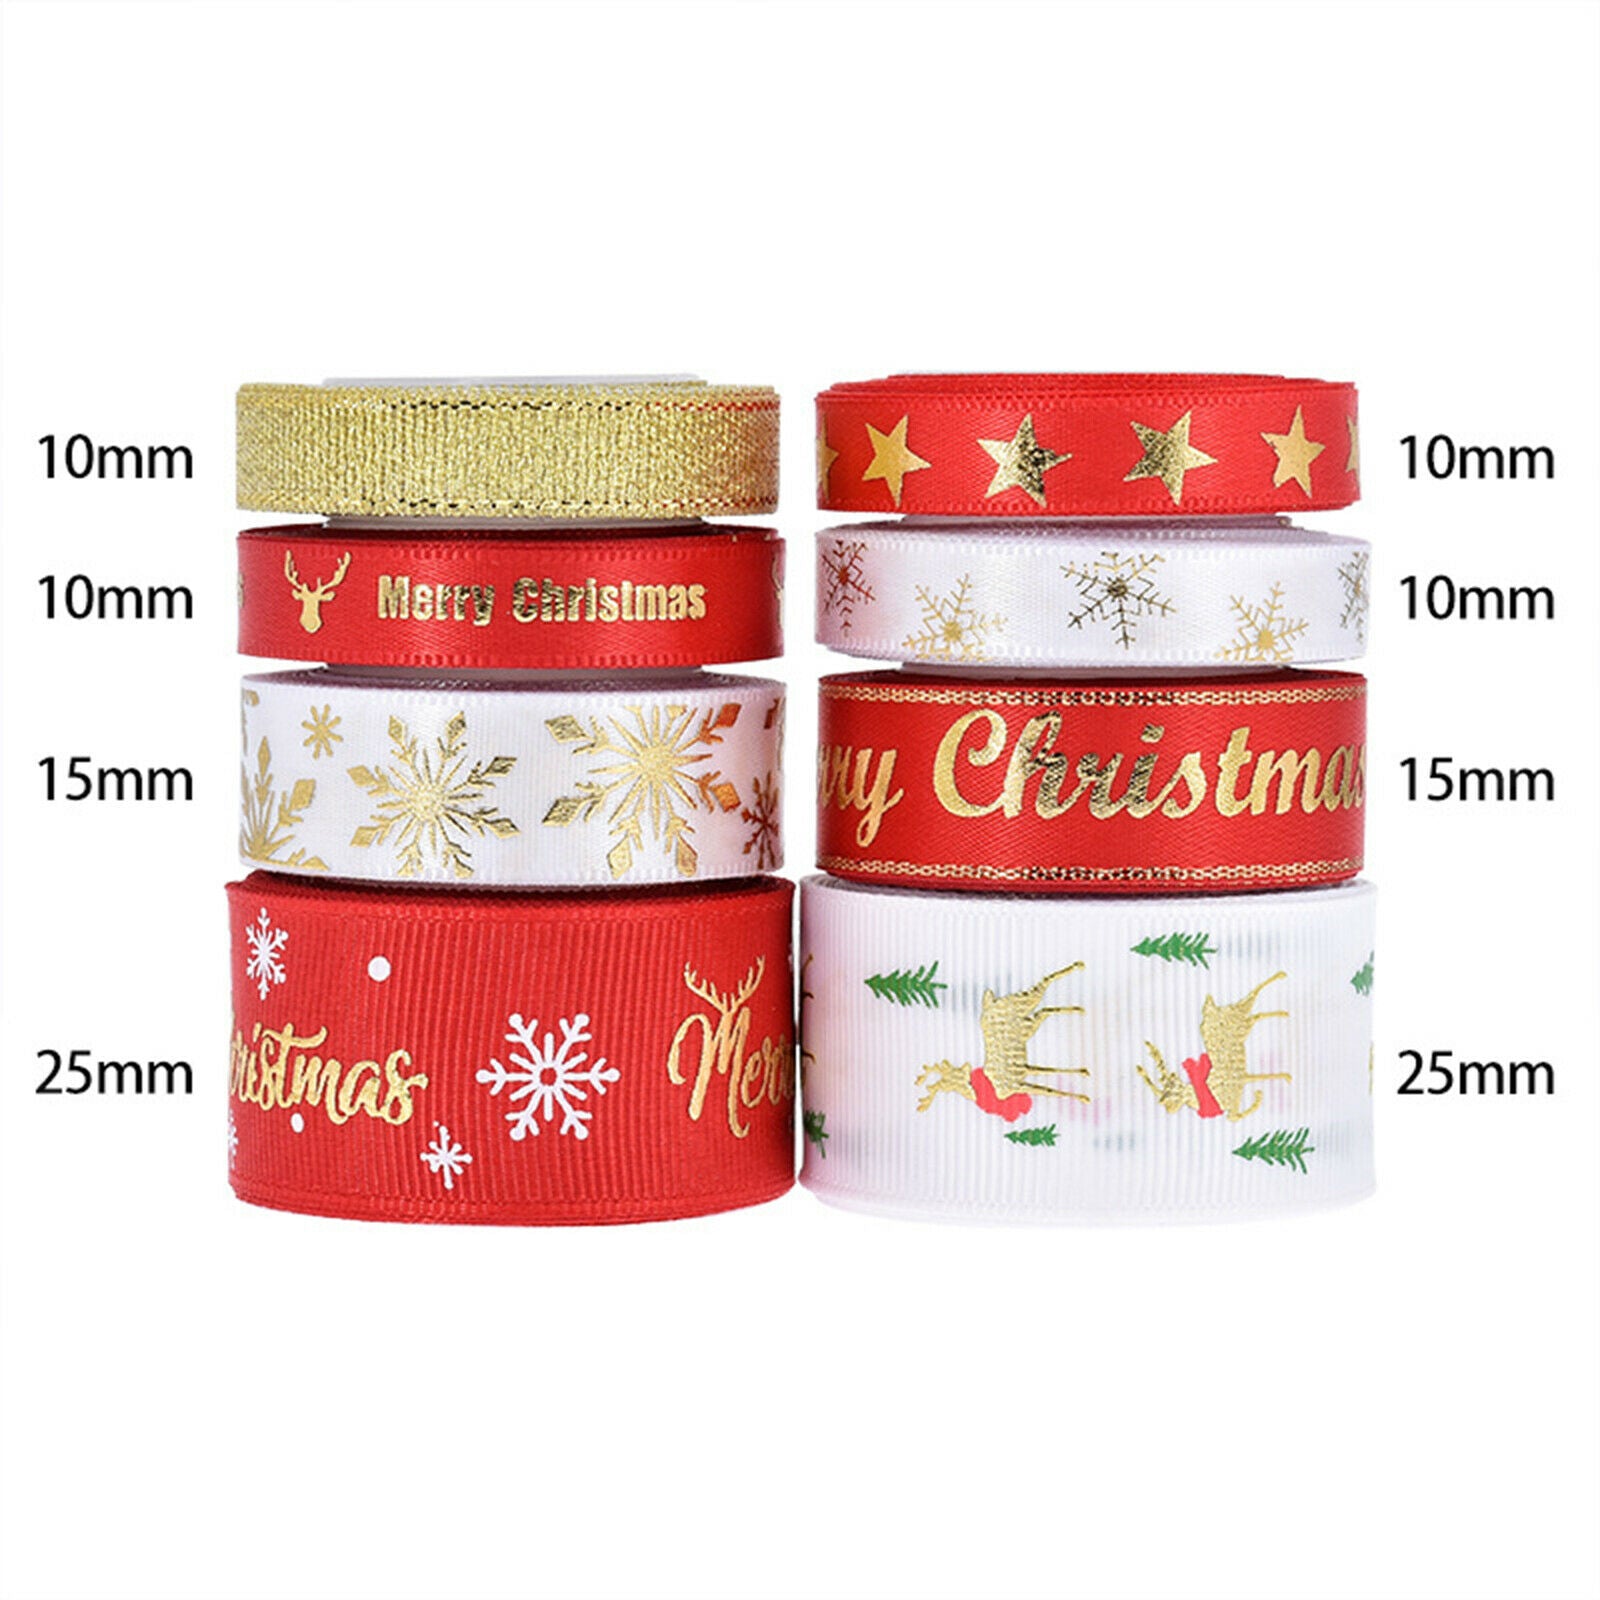 8x Christmas Ribbon Grosgrain Glitter Fabric Trimming Gift Wrapping Party